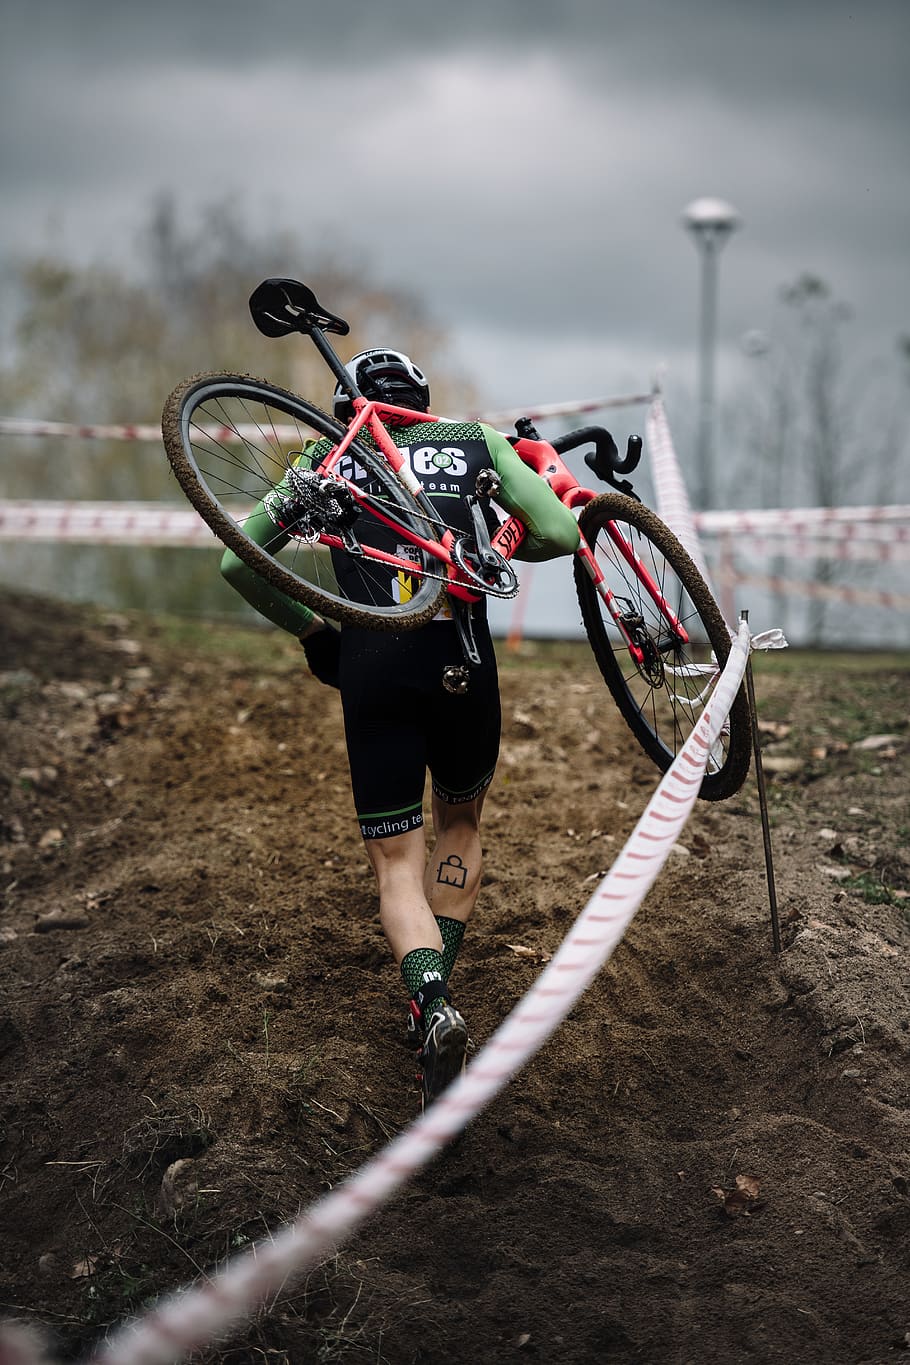 man carrying bike at the rocky road during the race, wheel, machine